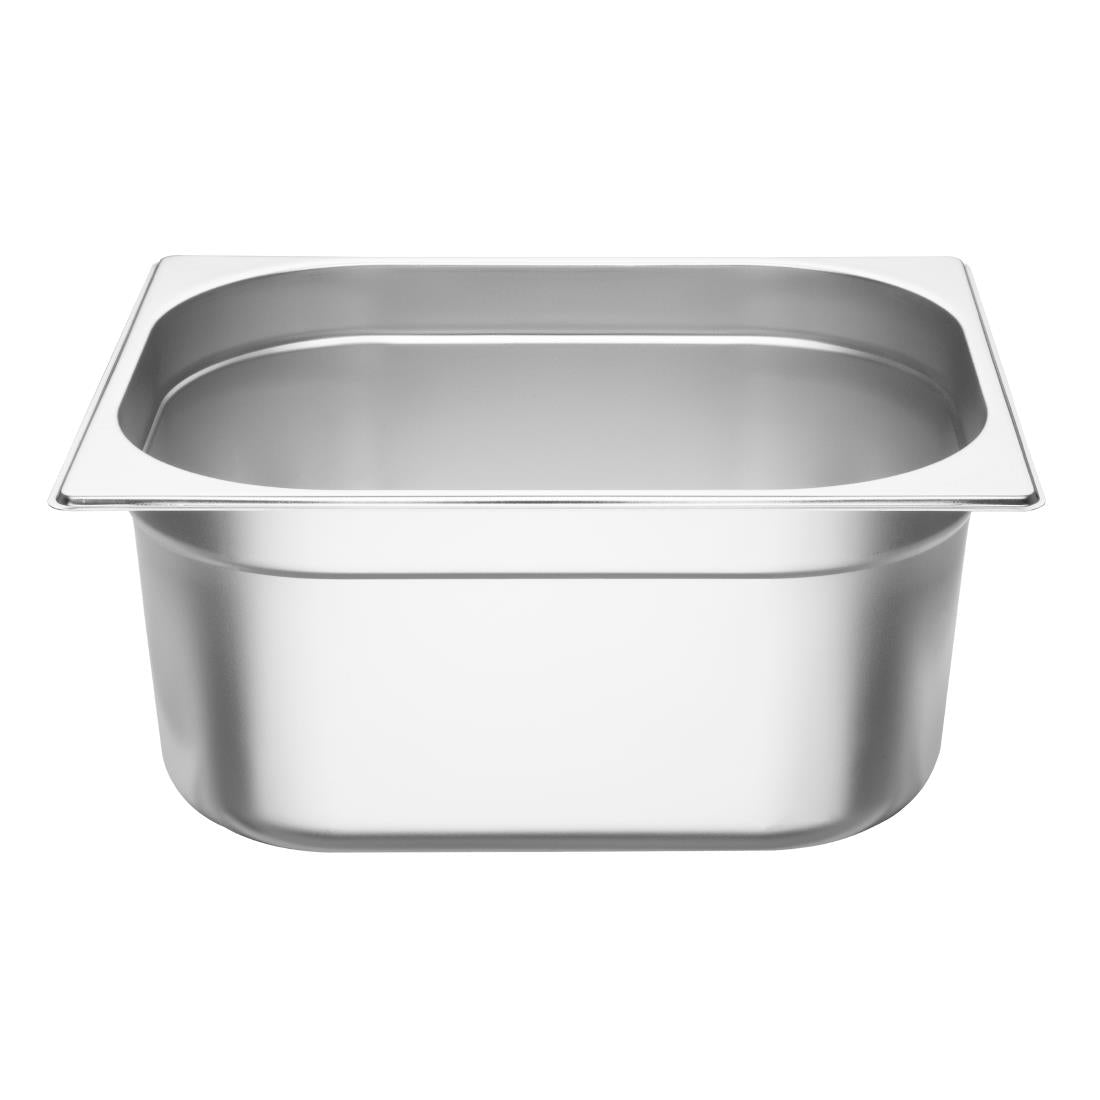 Vogue Stainless Steel 1/2 Gastronorm Pan 150mm